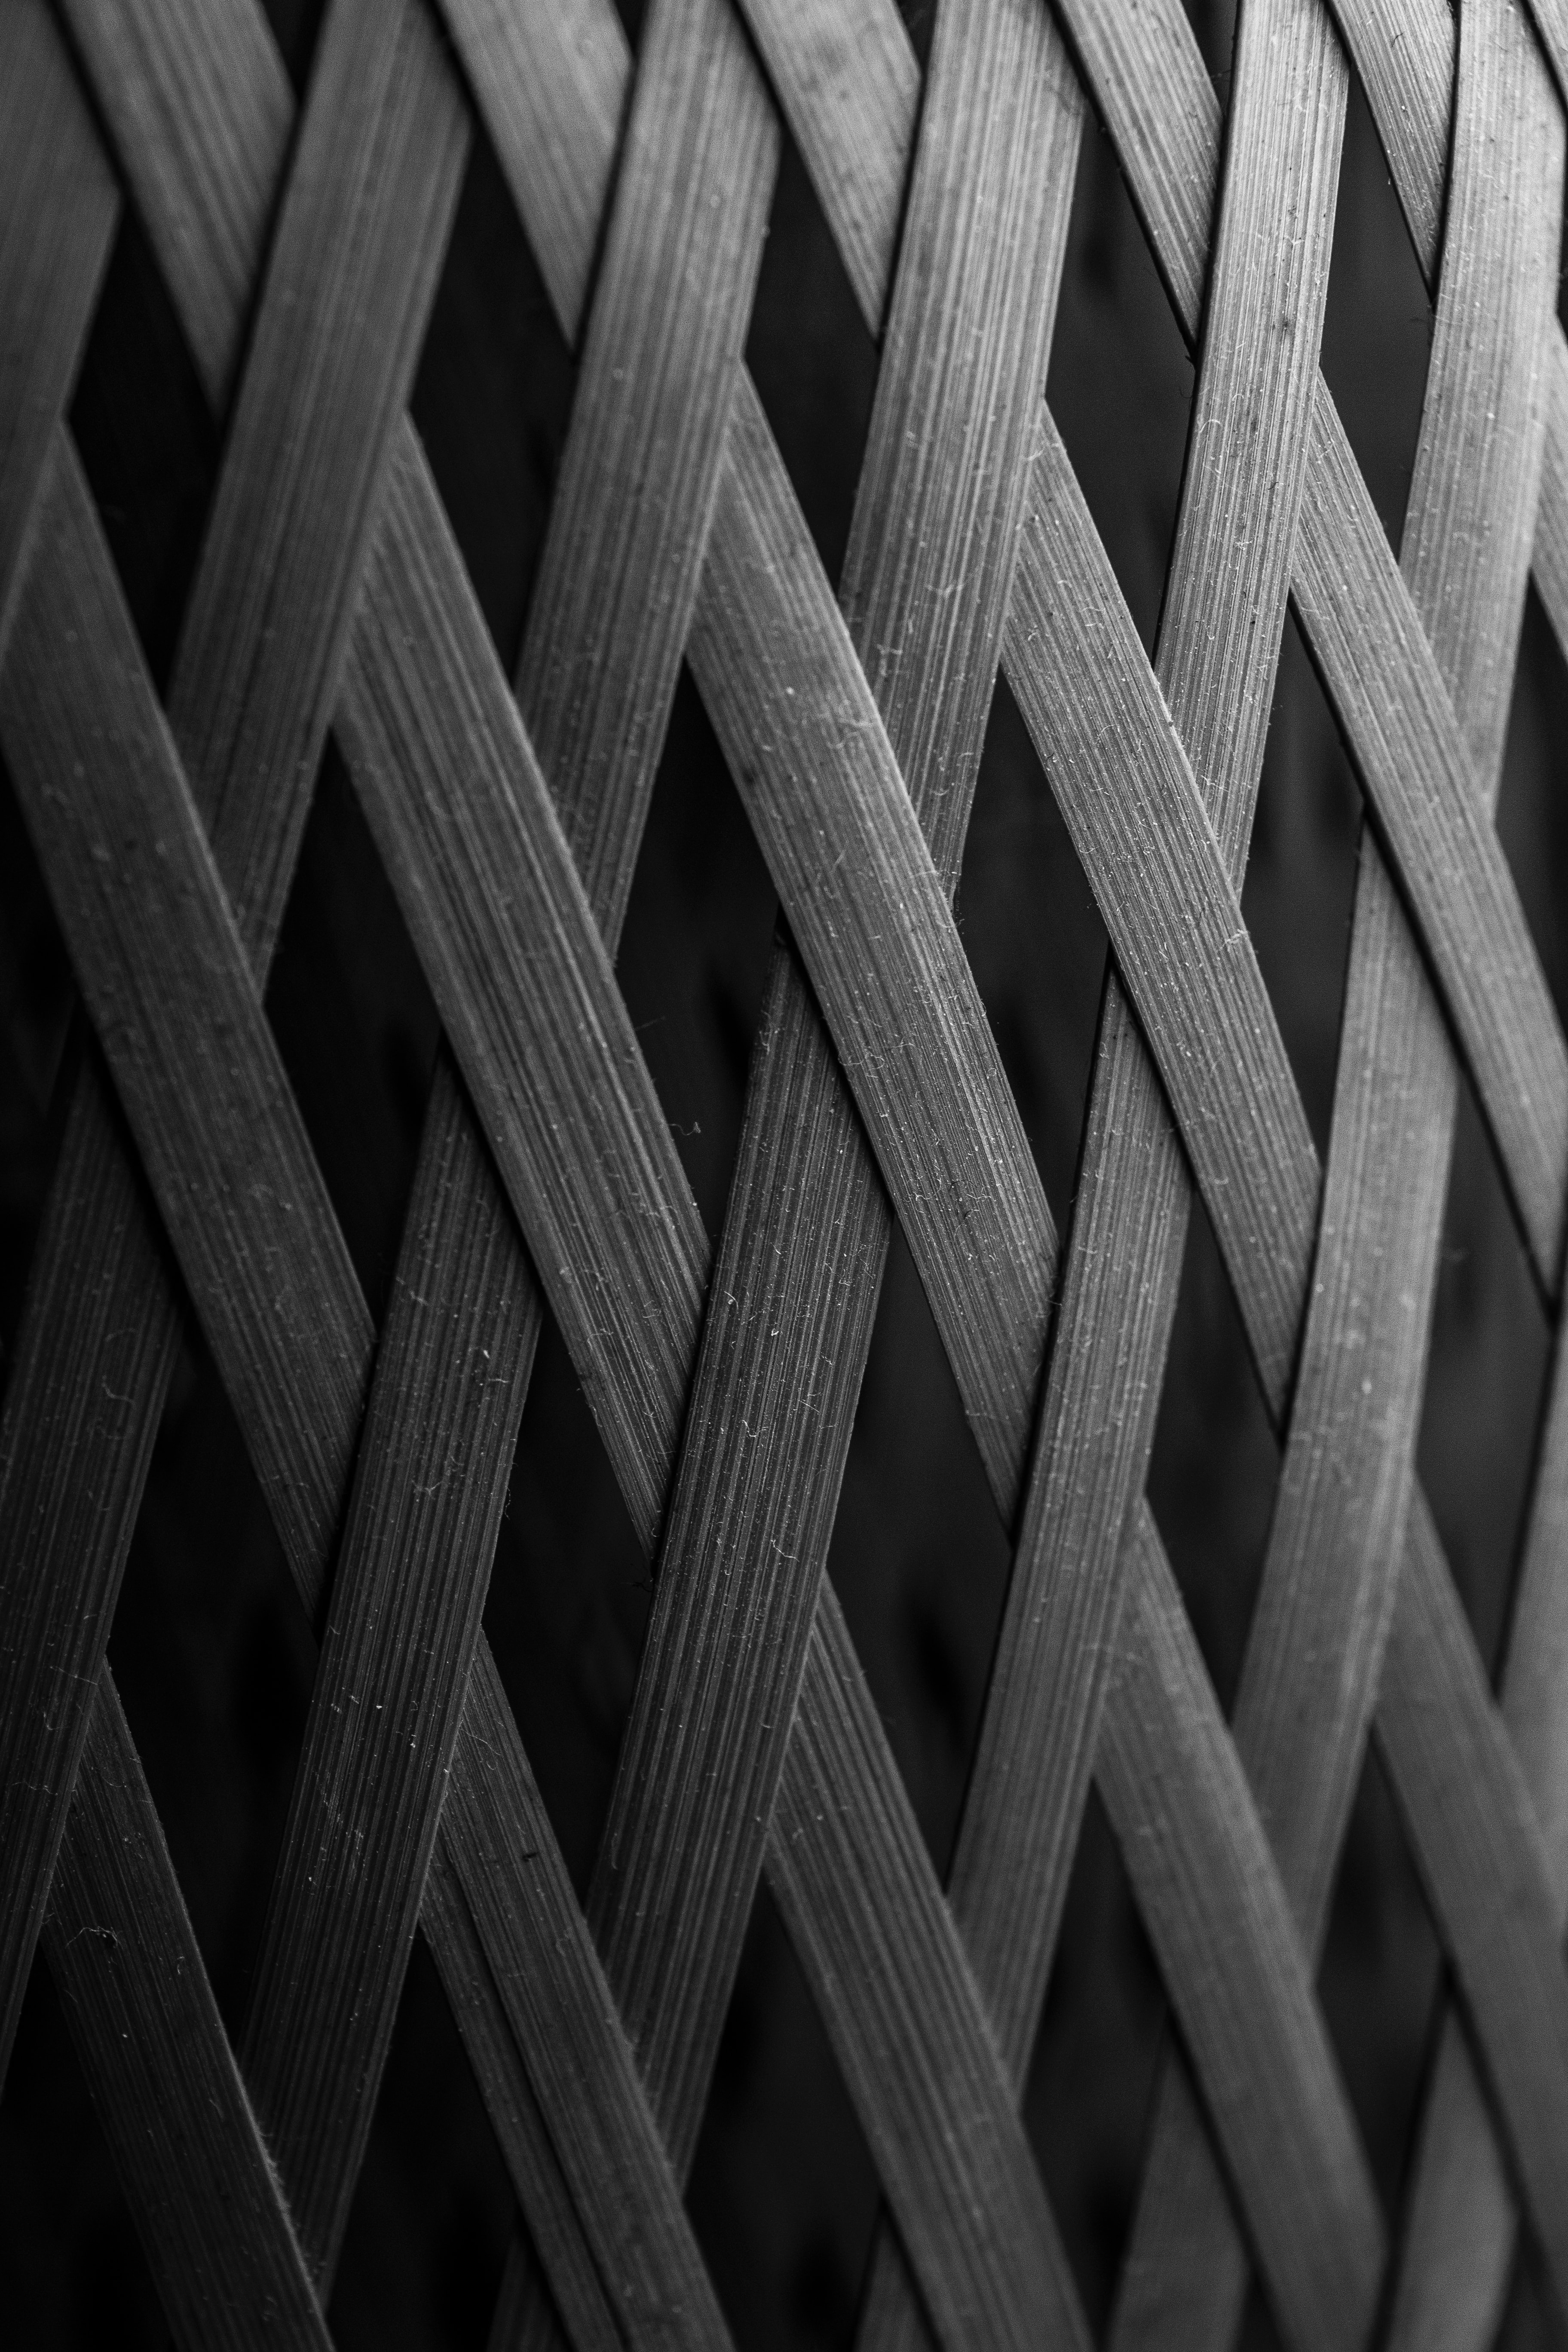 facade, wooden, chb, texture, wood, textures, fence, bw lock screen backgrounds